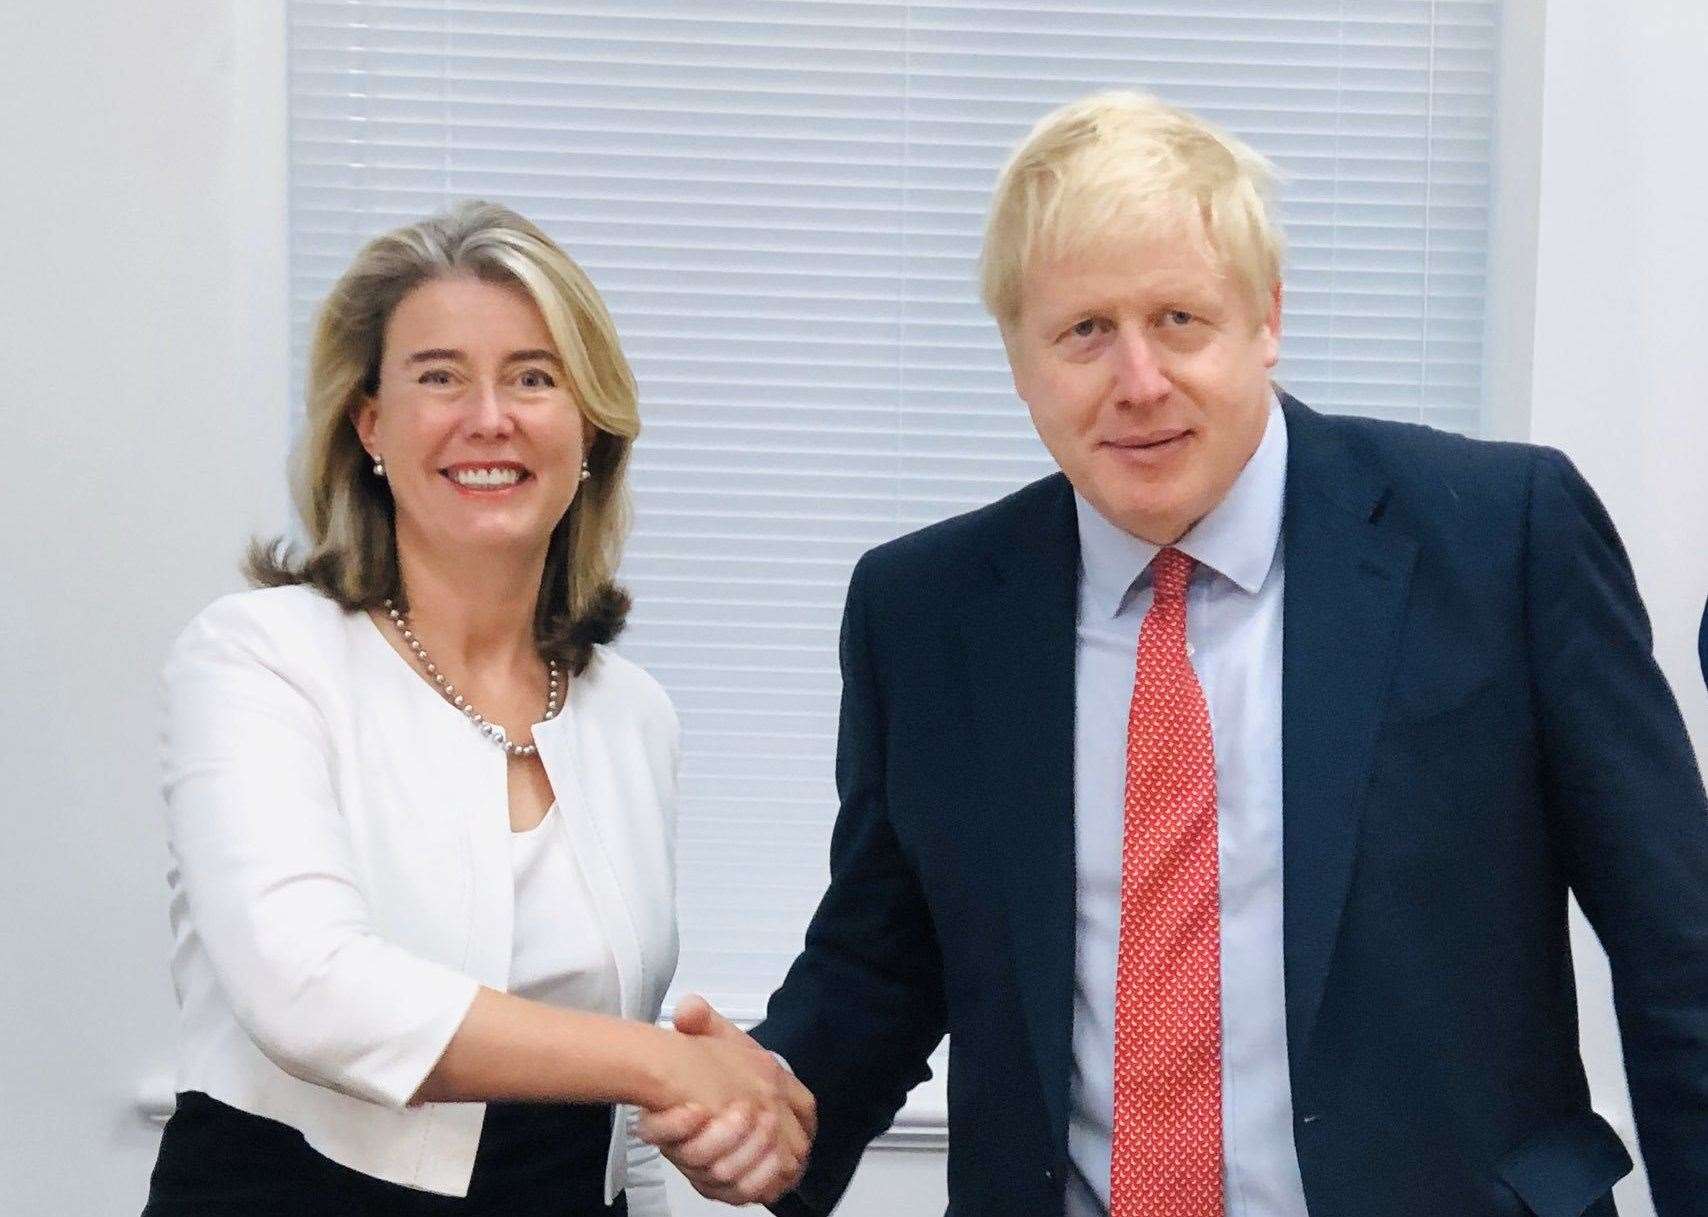 'I have always found Boris Johnson very straightforward in discussions I have had with him'